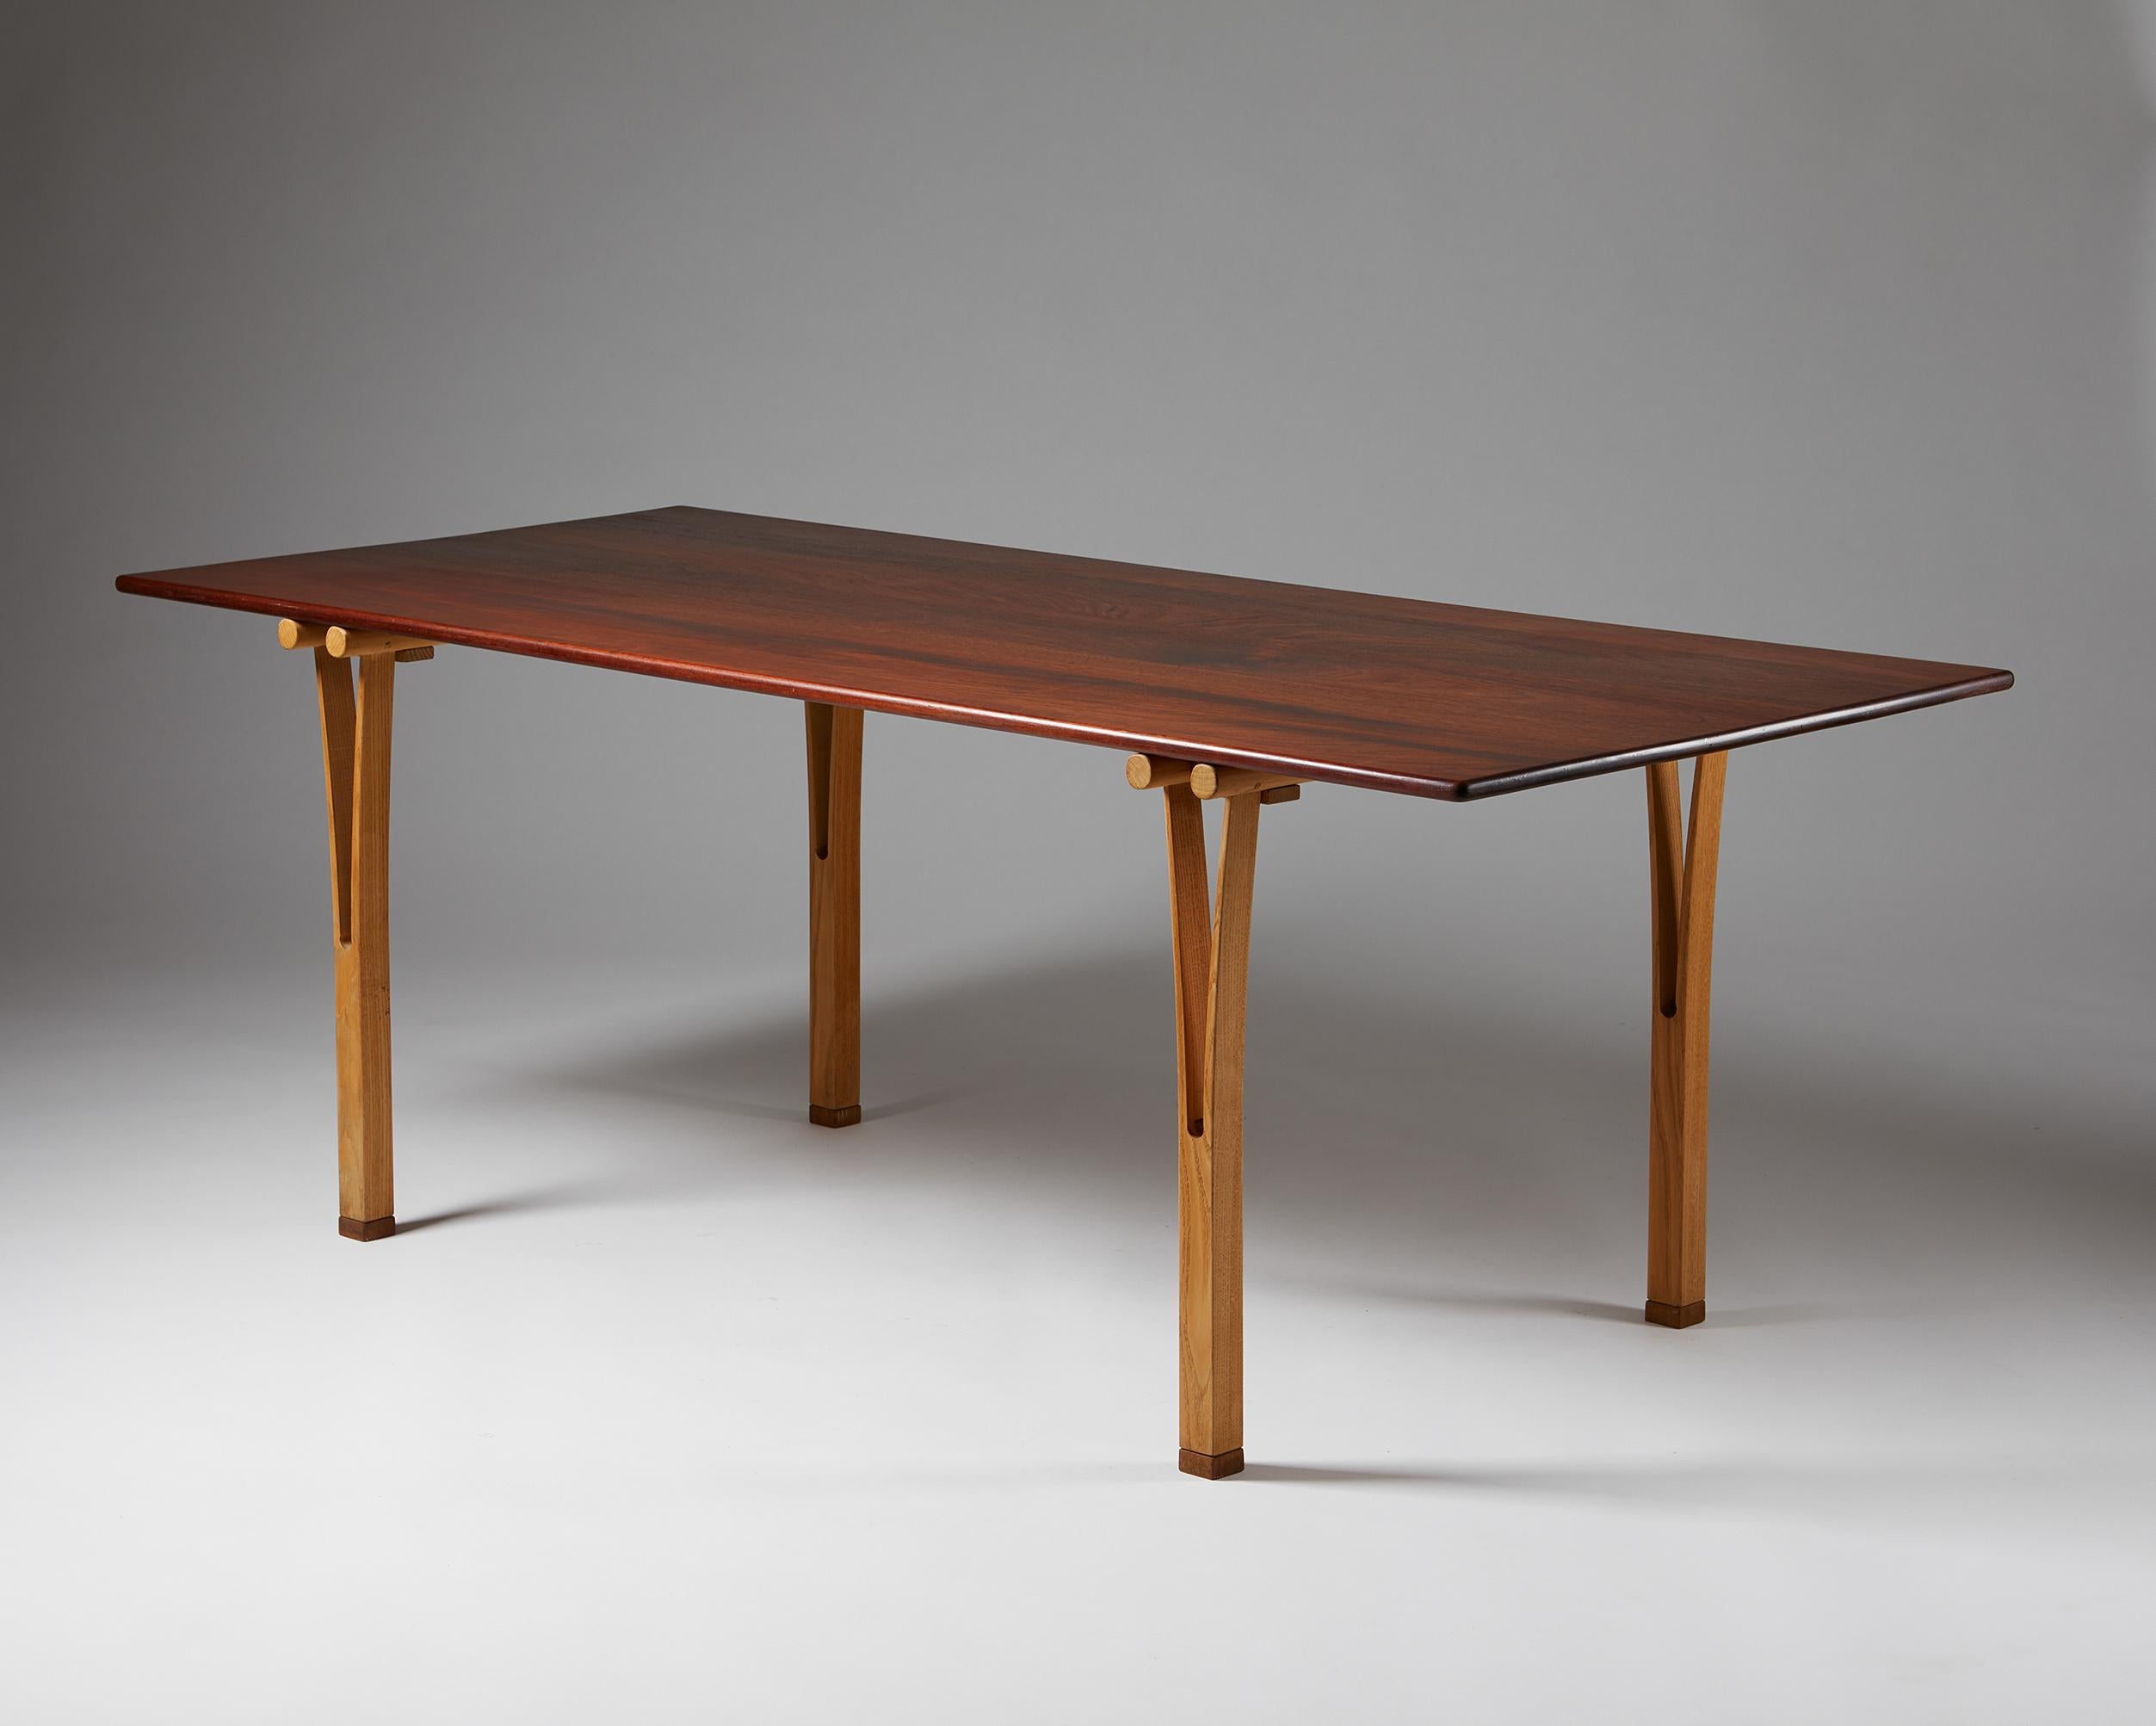 Dining table “Ararat” designed by Åke Axelsson,
Sweden, 1960s.

Teak and beech.

The table was designed by Åke Axelsson for his own personal use.

Dimensions: 
H: 70 cm / 2’ 3 1/2’
L: 192 cm / 6’ 4 1/2’’
W: 84 cm / 2’ 9’’

Åke Axelsson is one of